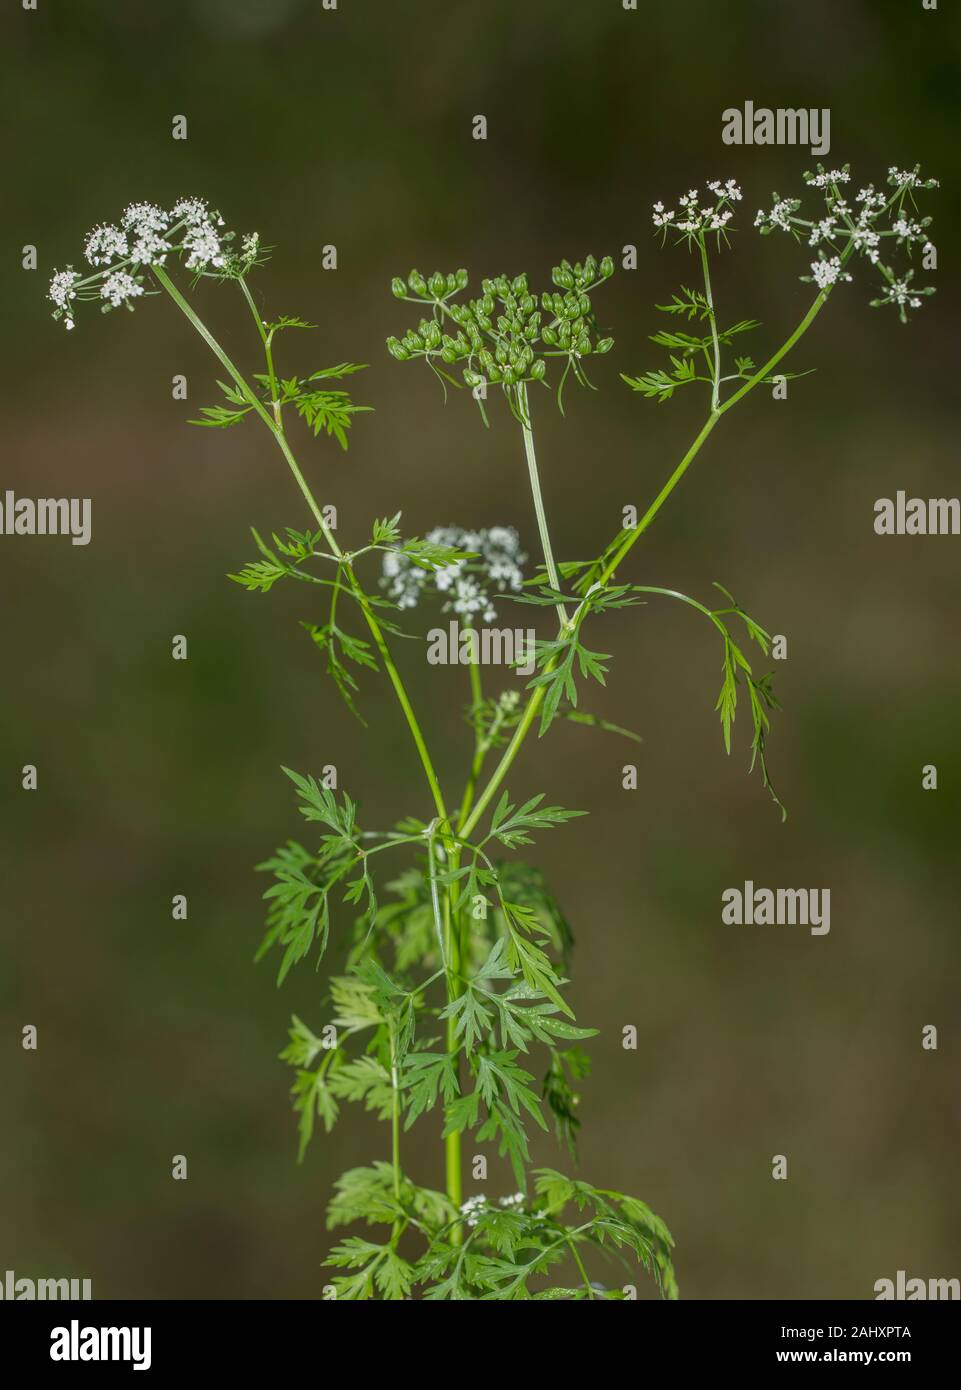 Fool's Parsley, Aethusa cynapium, in flower in garden Stock Photo - Alamy